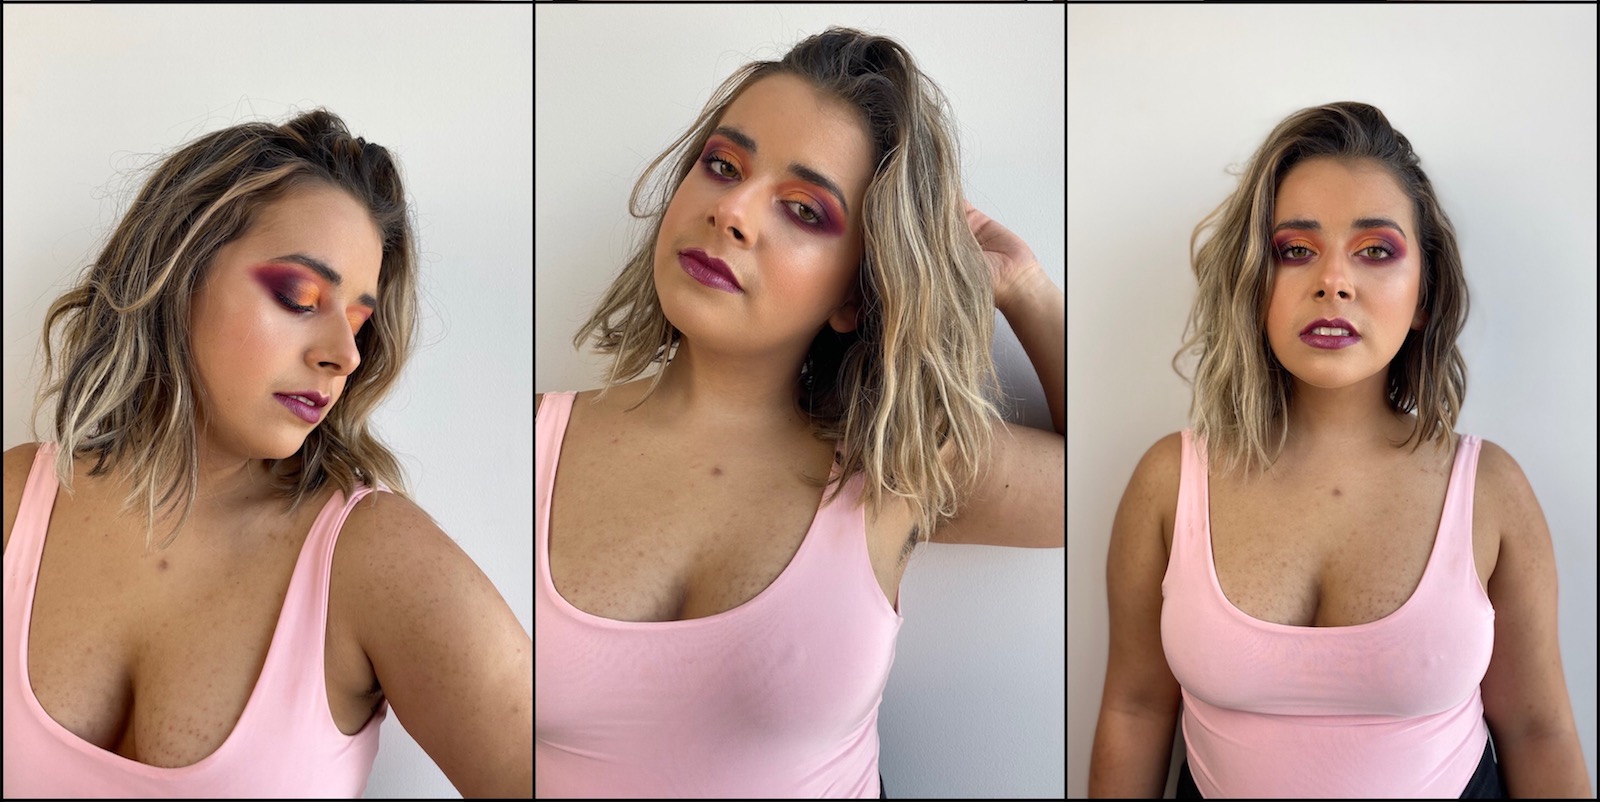 A three-photo collage of the author, Olivia Zayas Ryan, in dramatic makeup. The tones are magenta and orange and she poses with her eyes closed and staring directly at the camera.